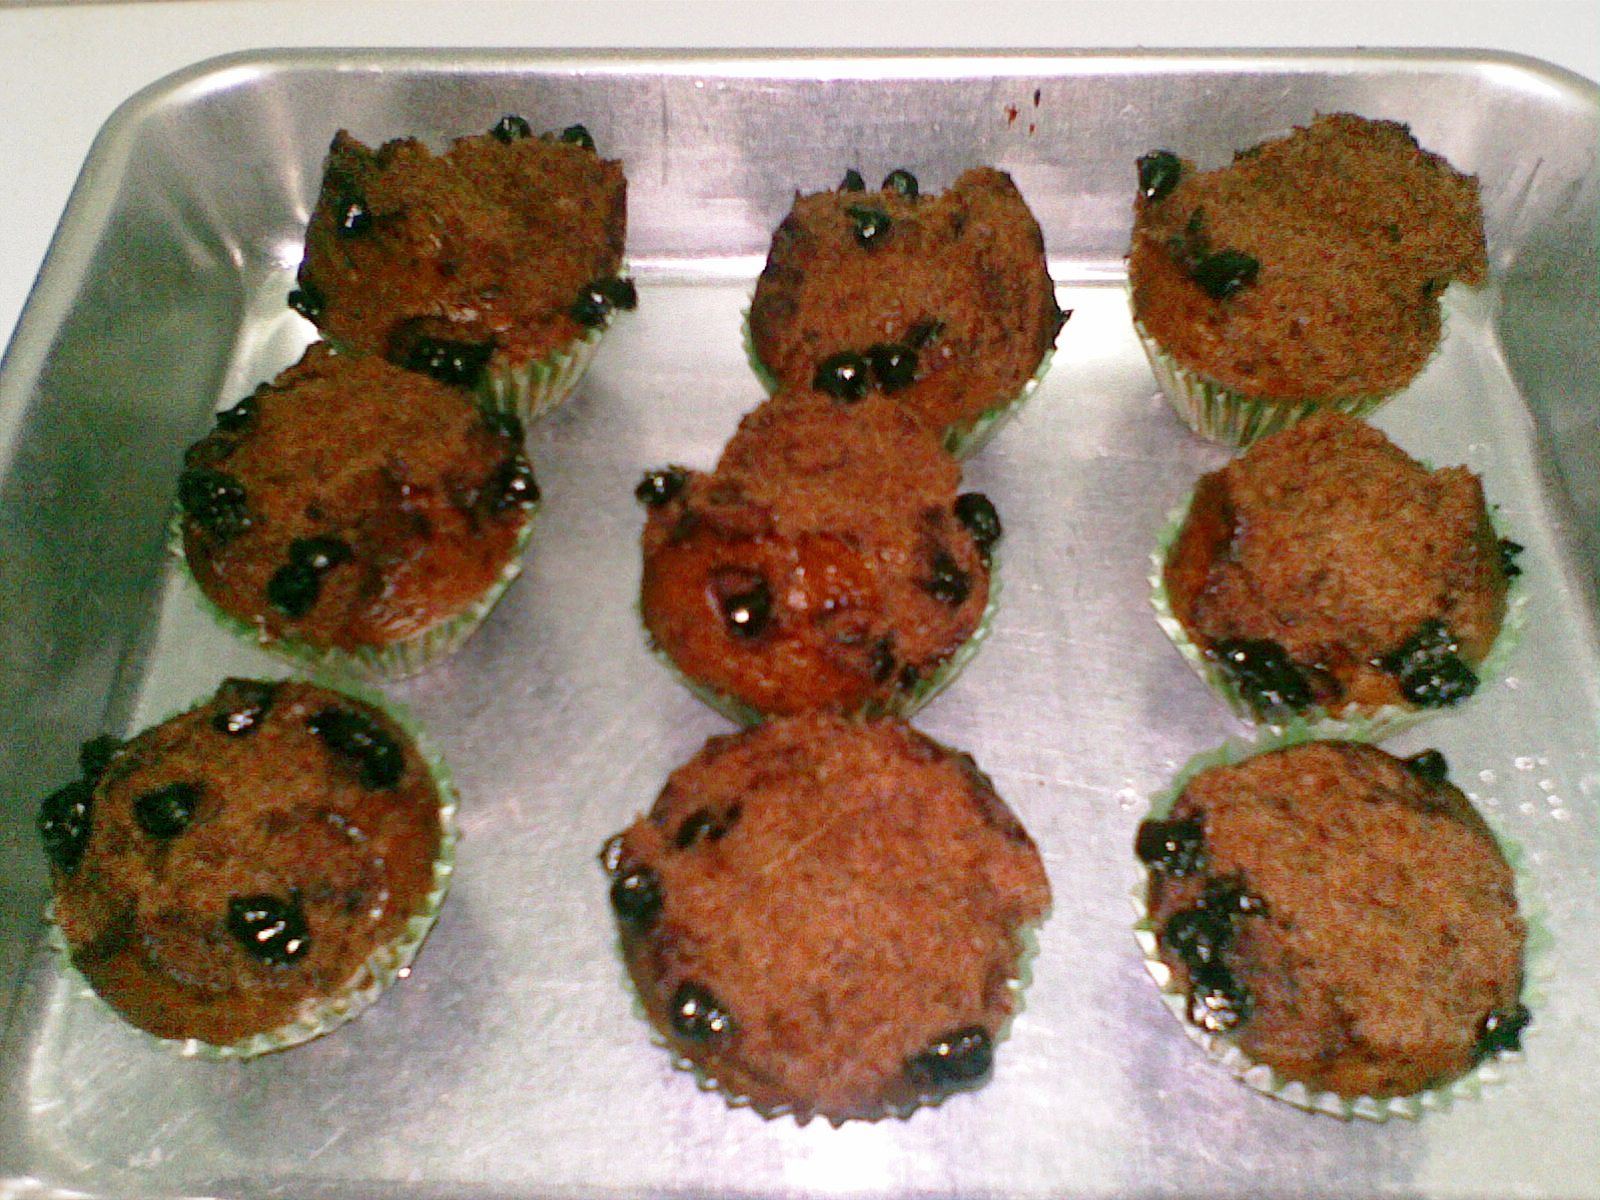 From Bakery 2 Embroidery: Muffin Pisang Chip Coklat Kukus 